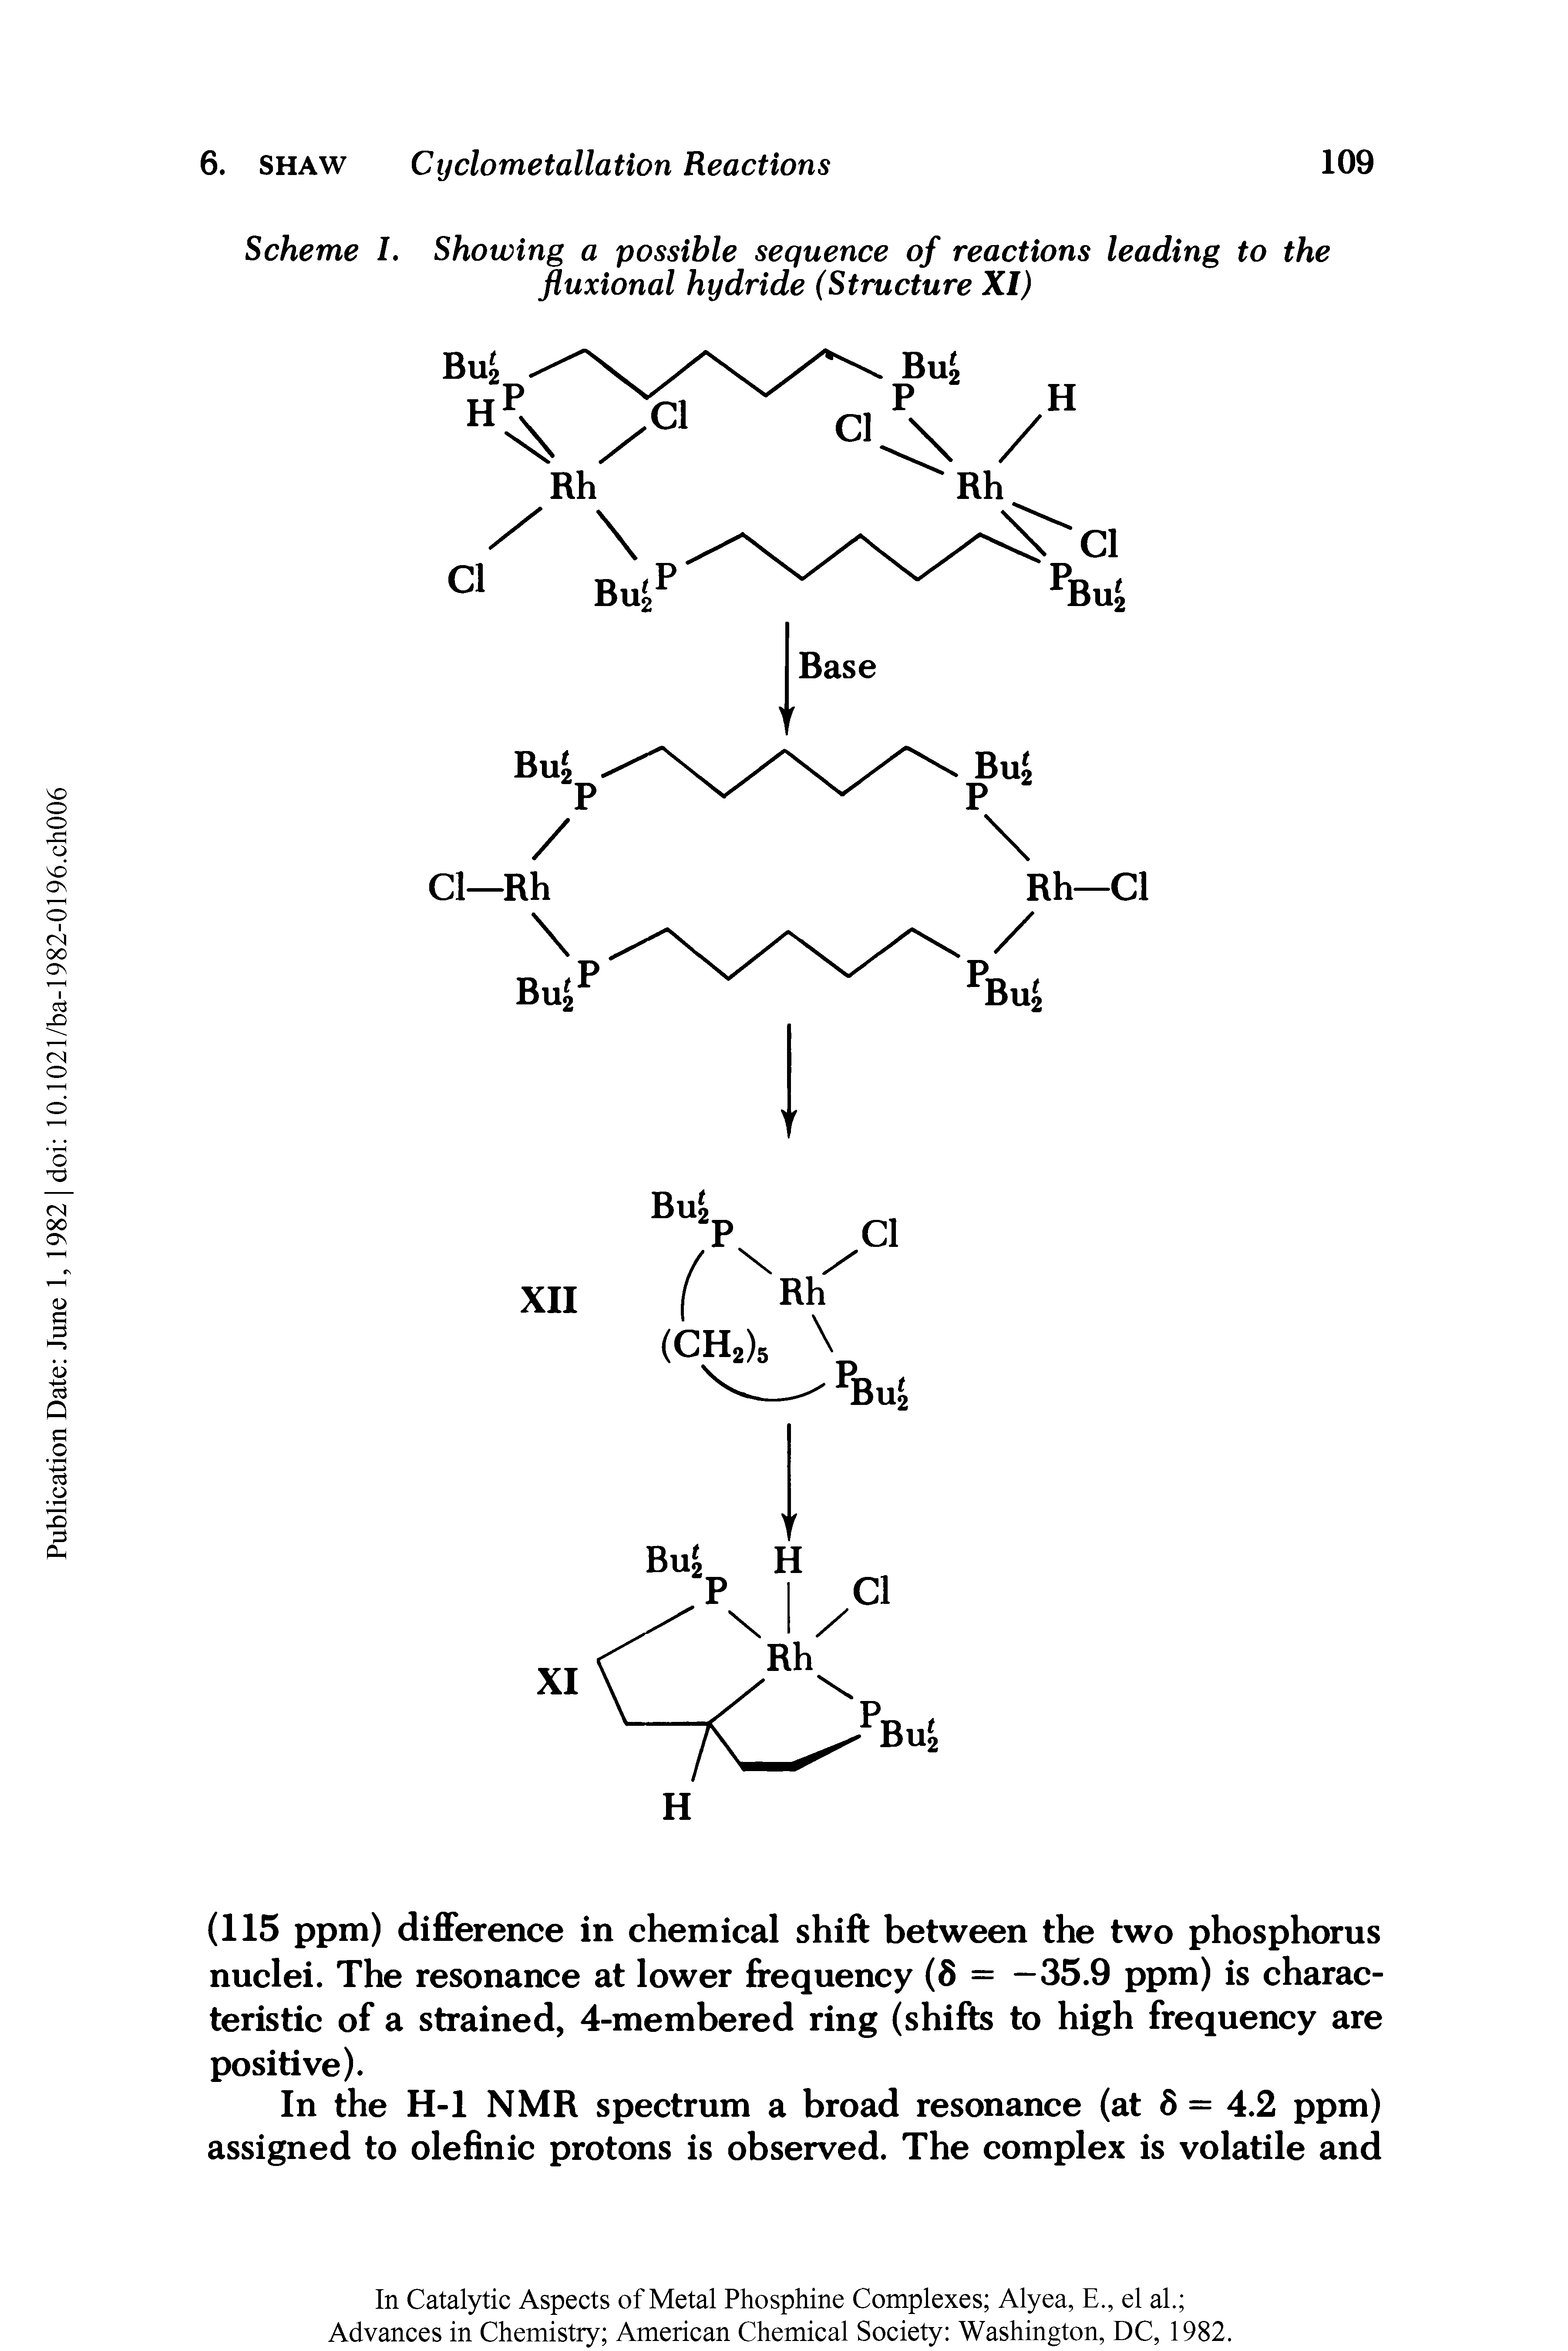 Scheme I. Showing a possible sequence of reactions leading to the fluxional hydride (Structure XI)...